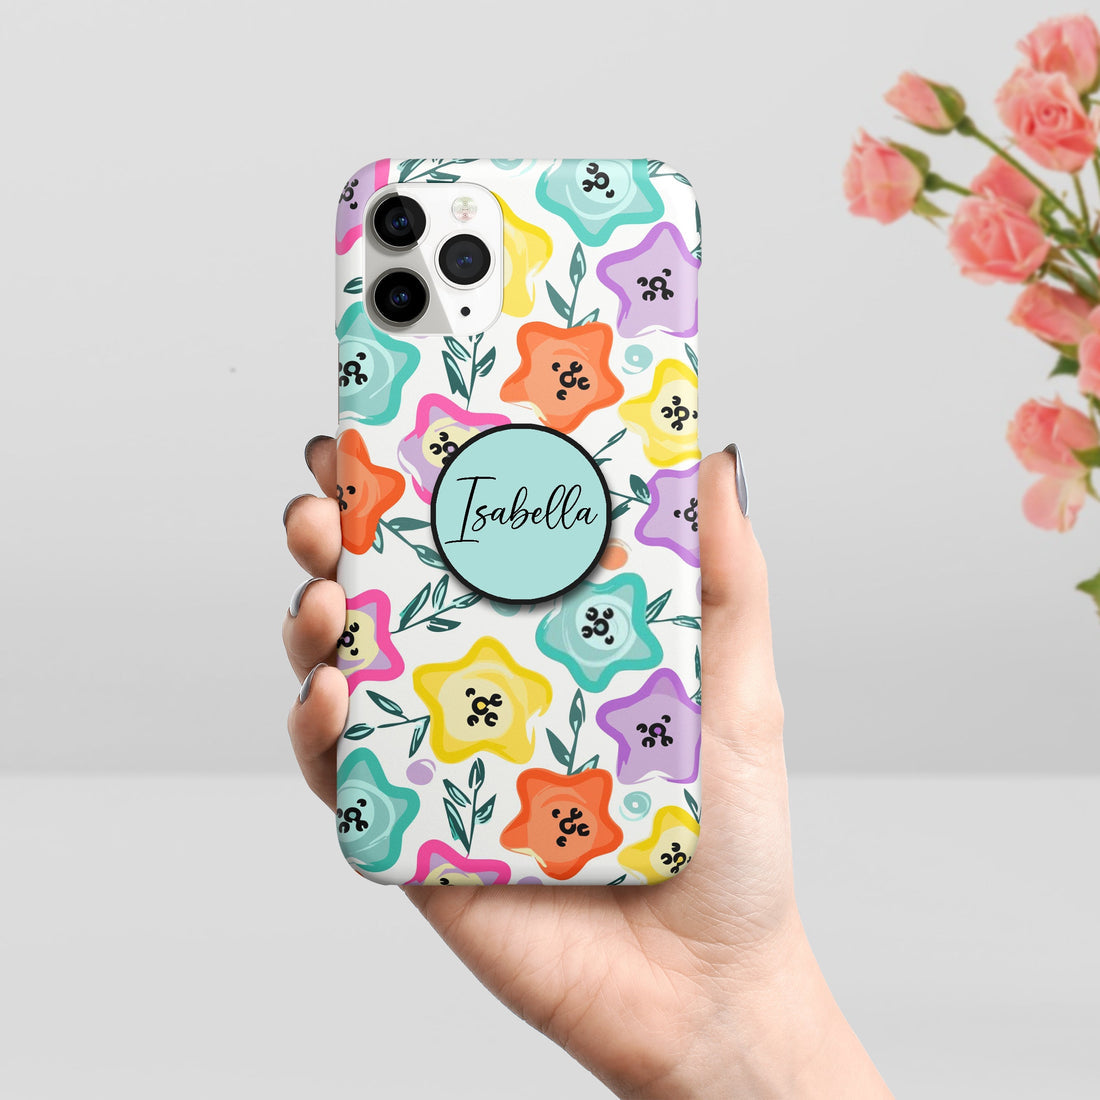 Star Floral Cases to Match Your Personal Style For Redmi/Xiaomi